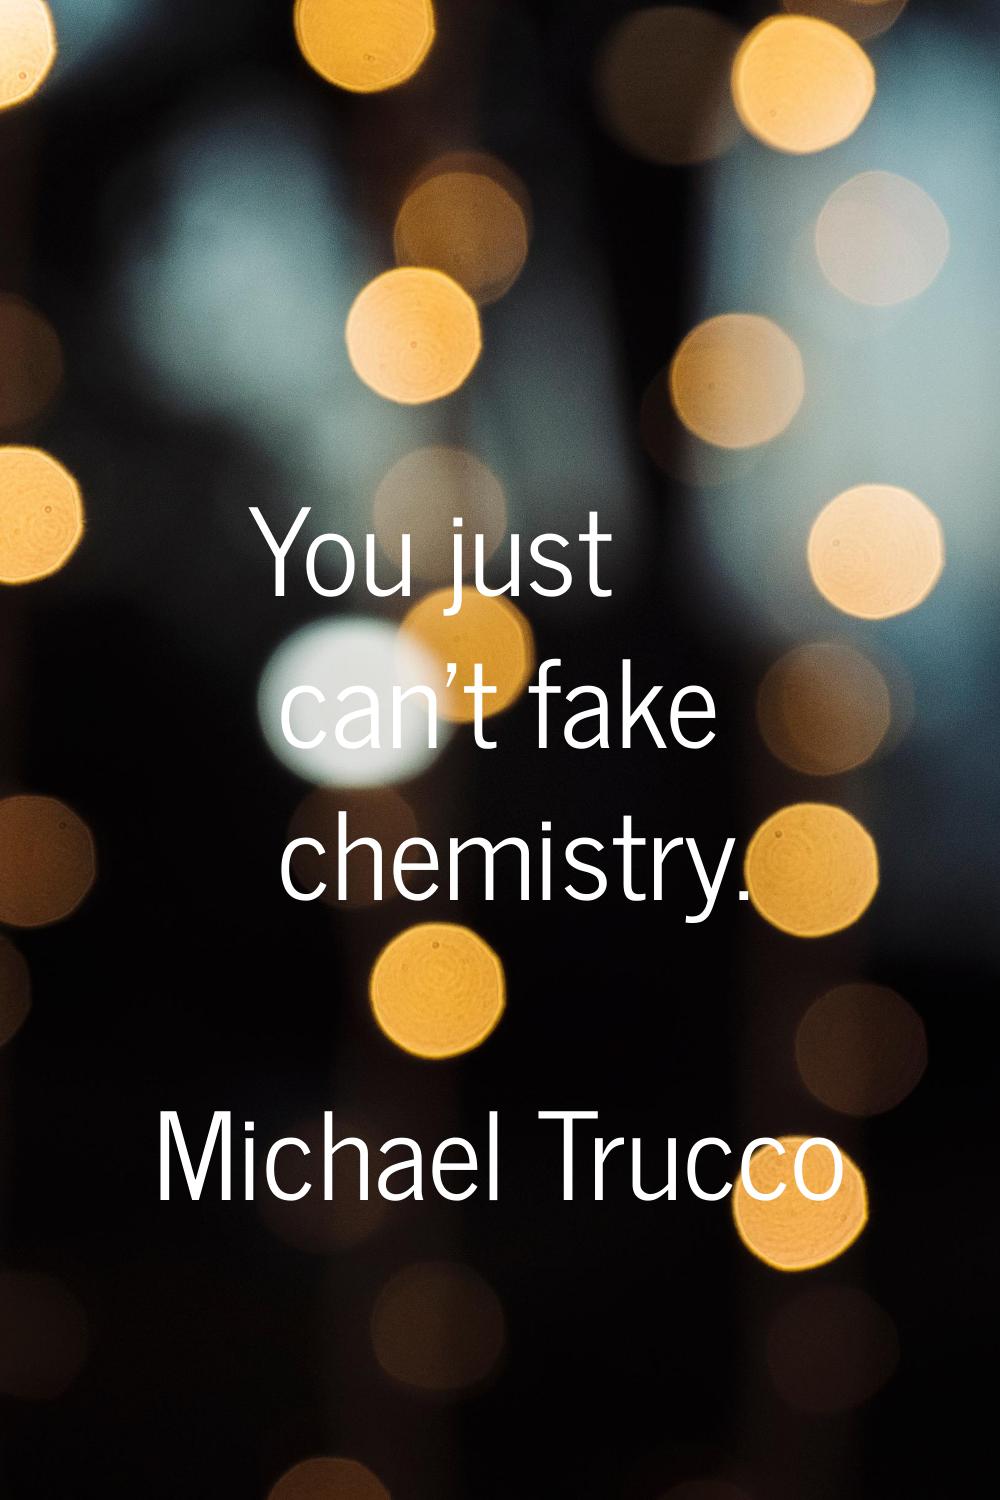 You just can't fake chemistry.